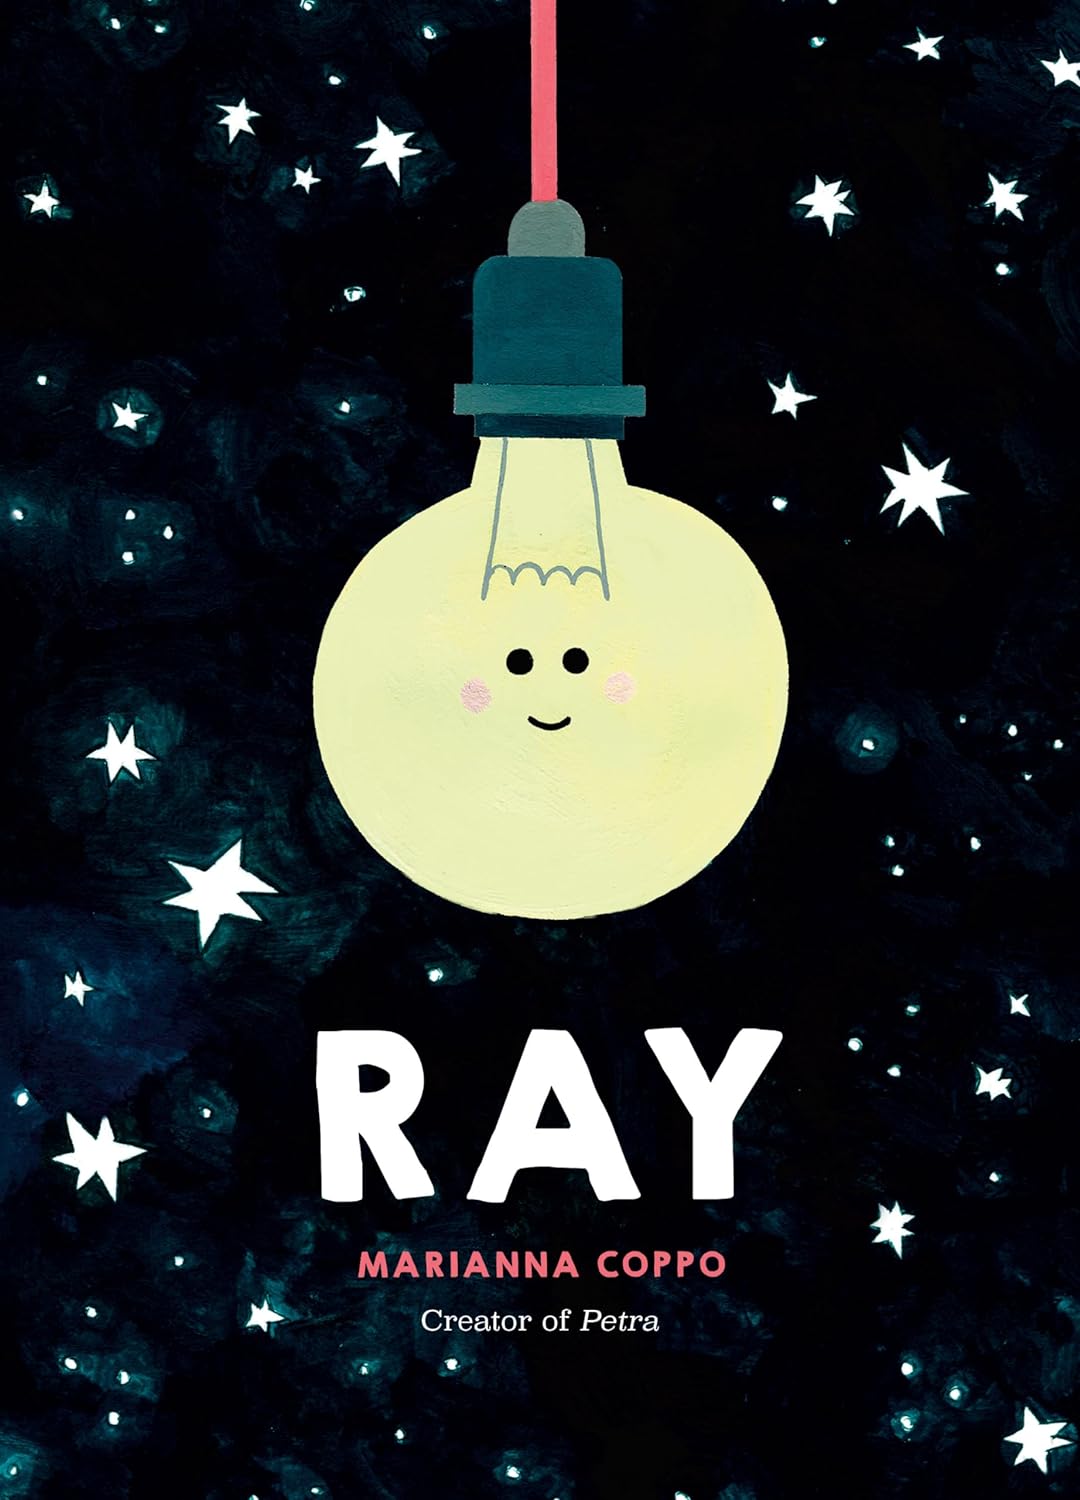 Ray book by Marianna Coppo featuring a lightbulb hanging with a face on it